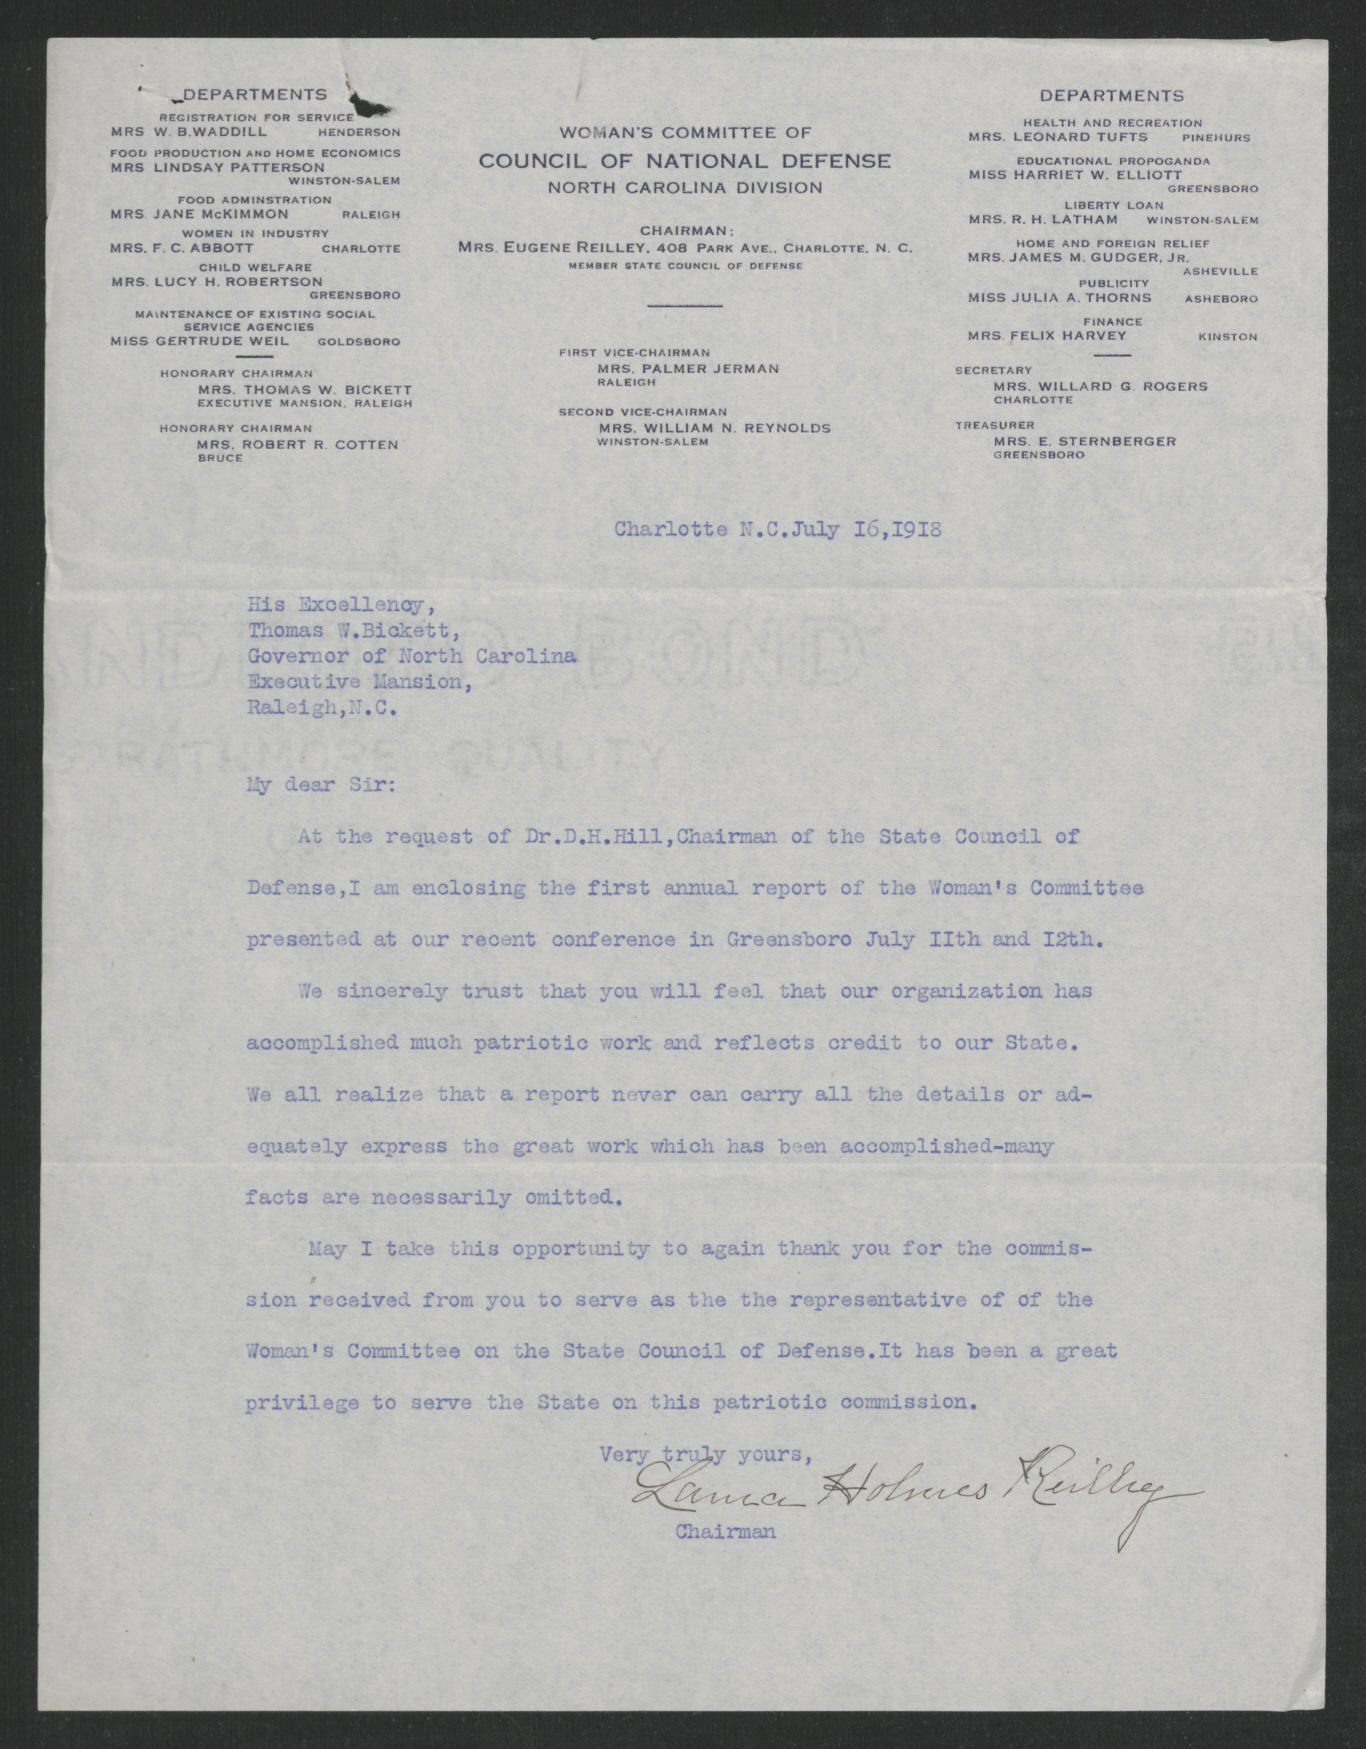 Letter from Laura H. Reilley to Thomas W. Bickett, July 16, 1918